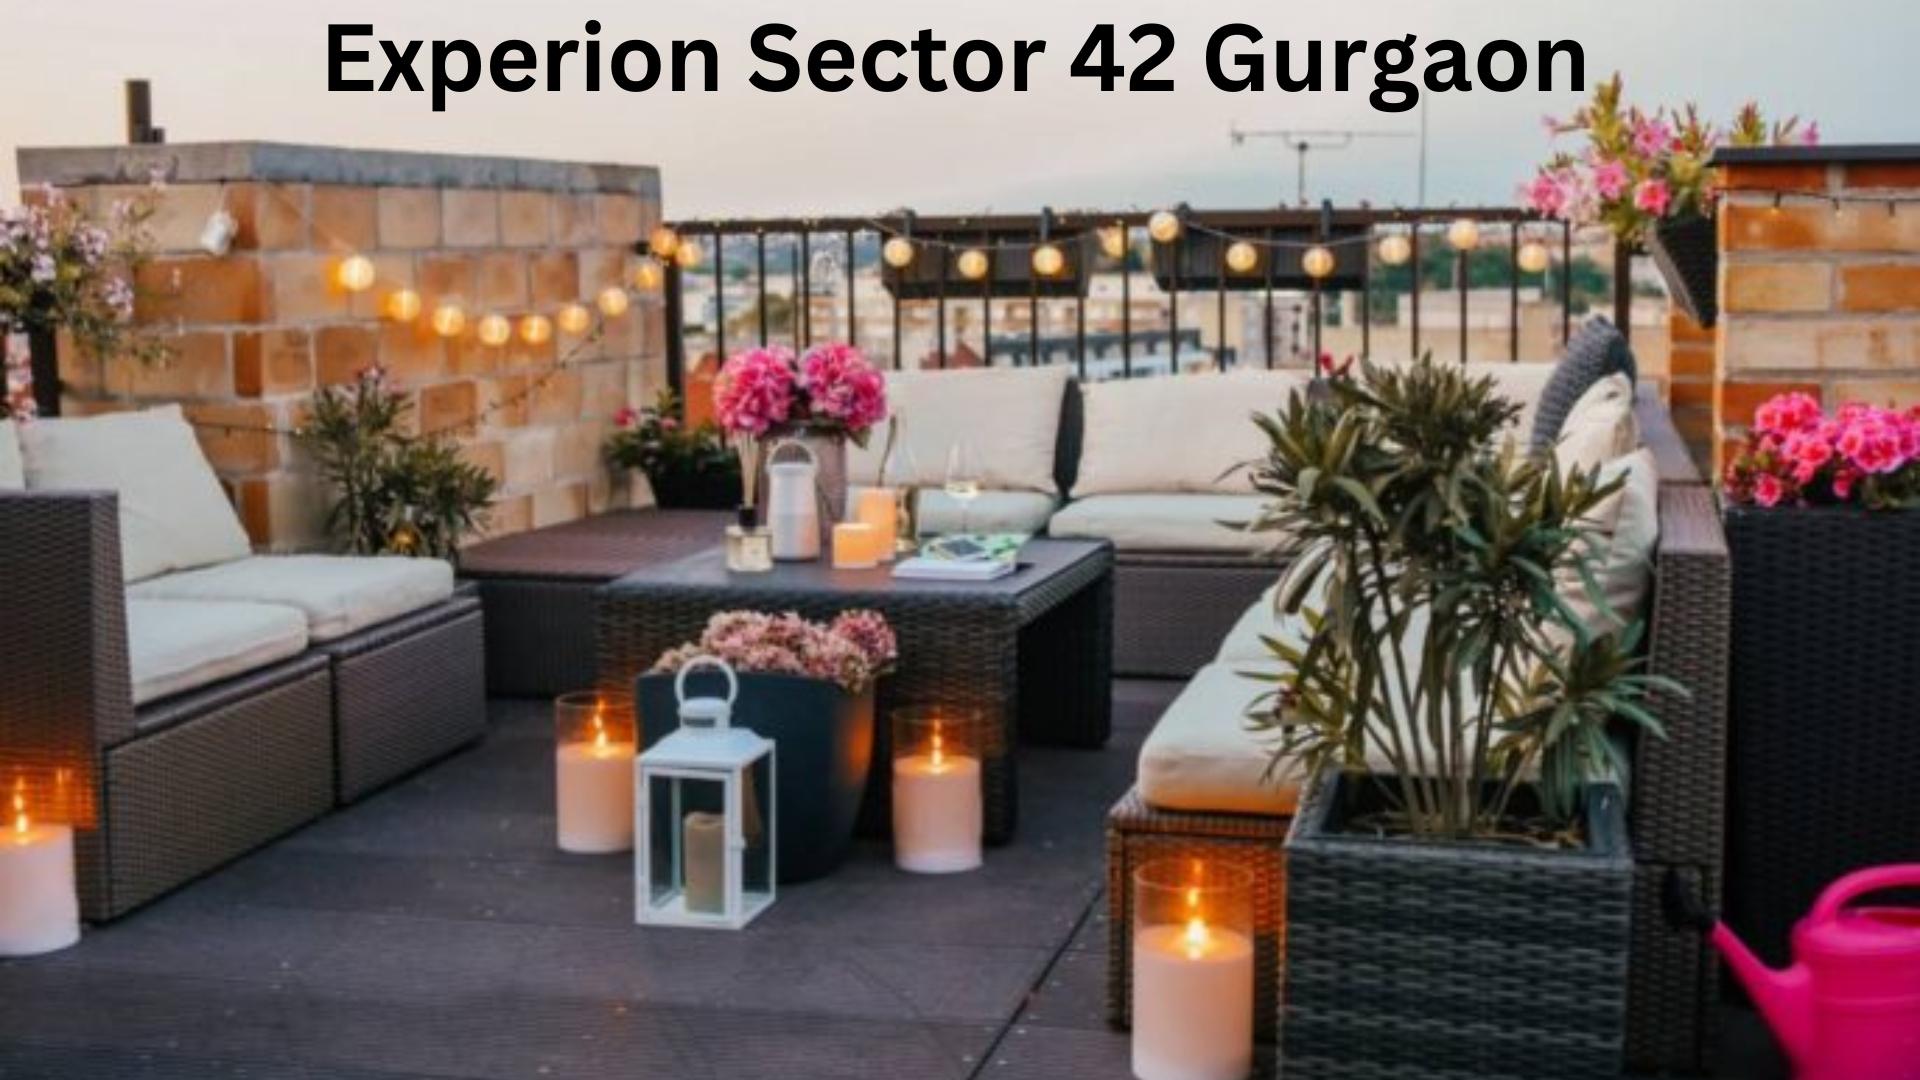 Experion Sector 42 Gurugram: Your Gateway to Luxurious Living